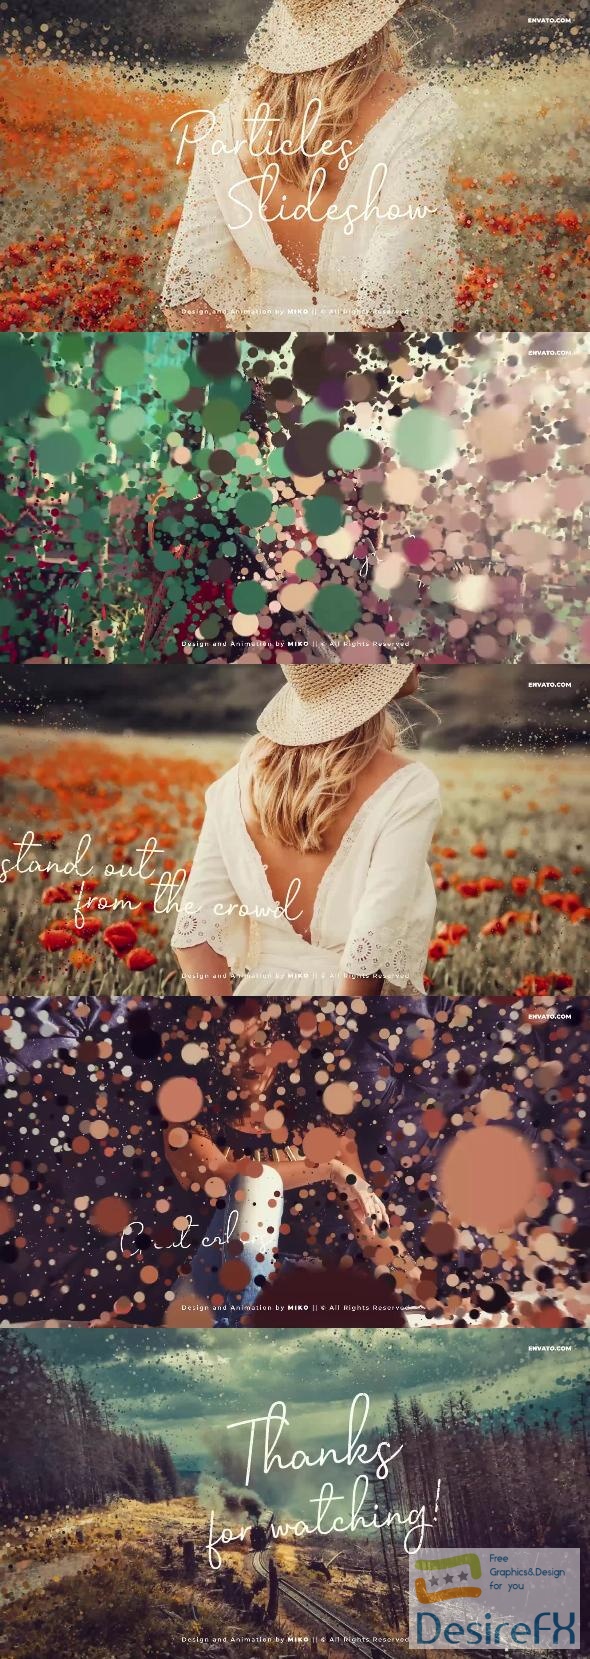 Videohive Particles Slideshow 38595990